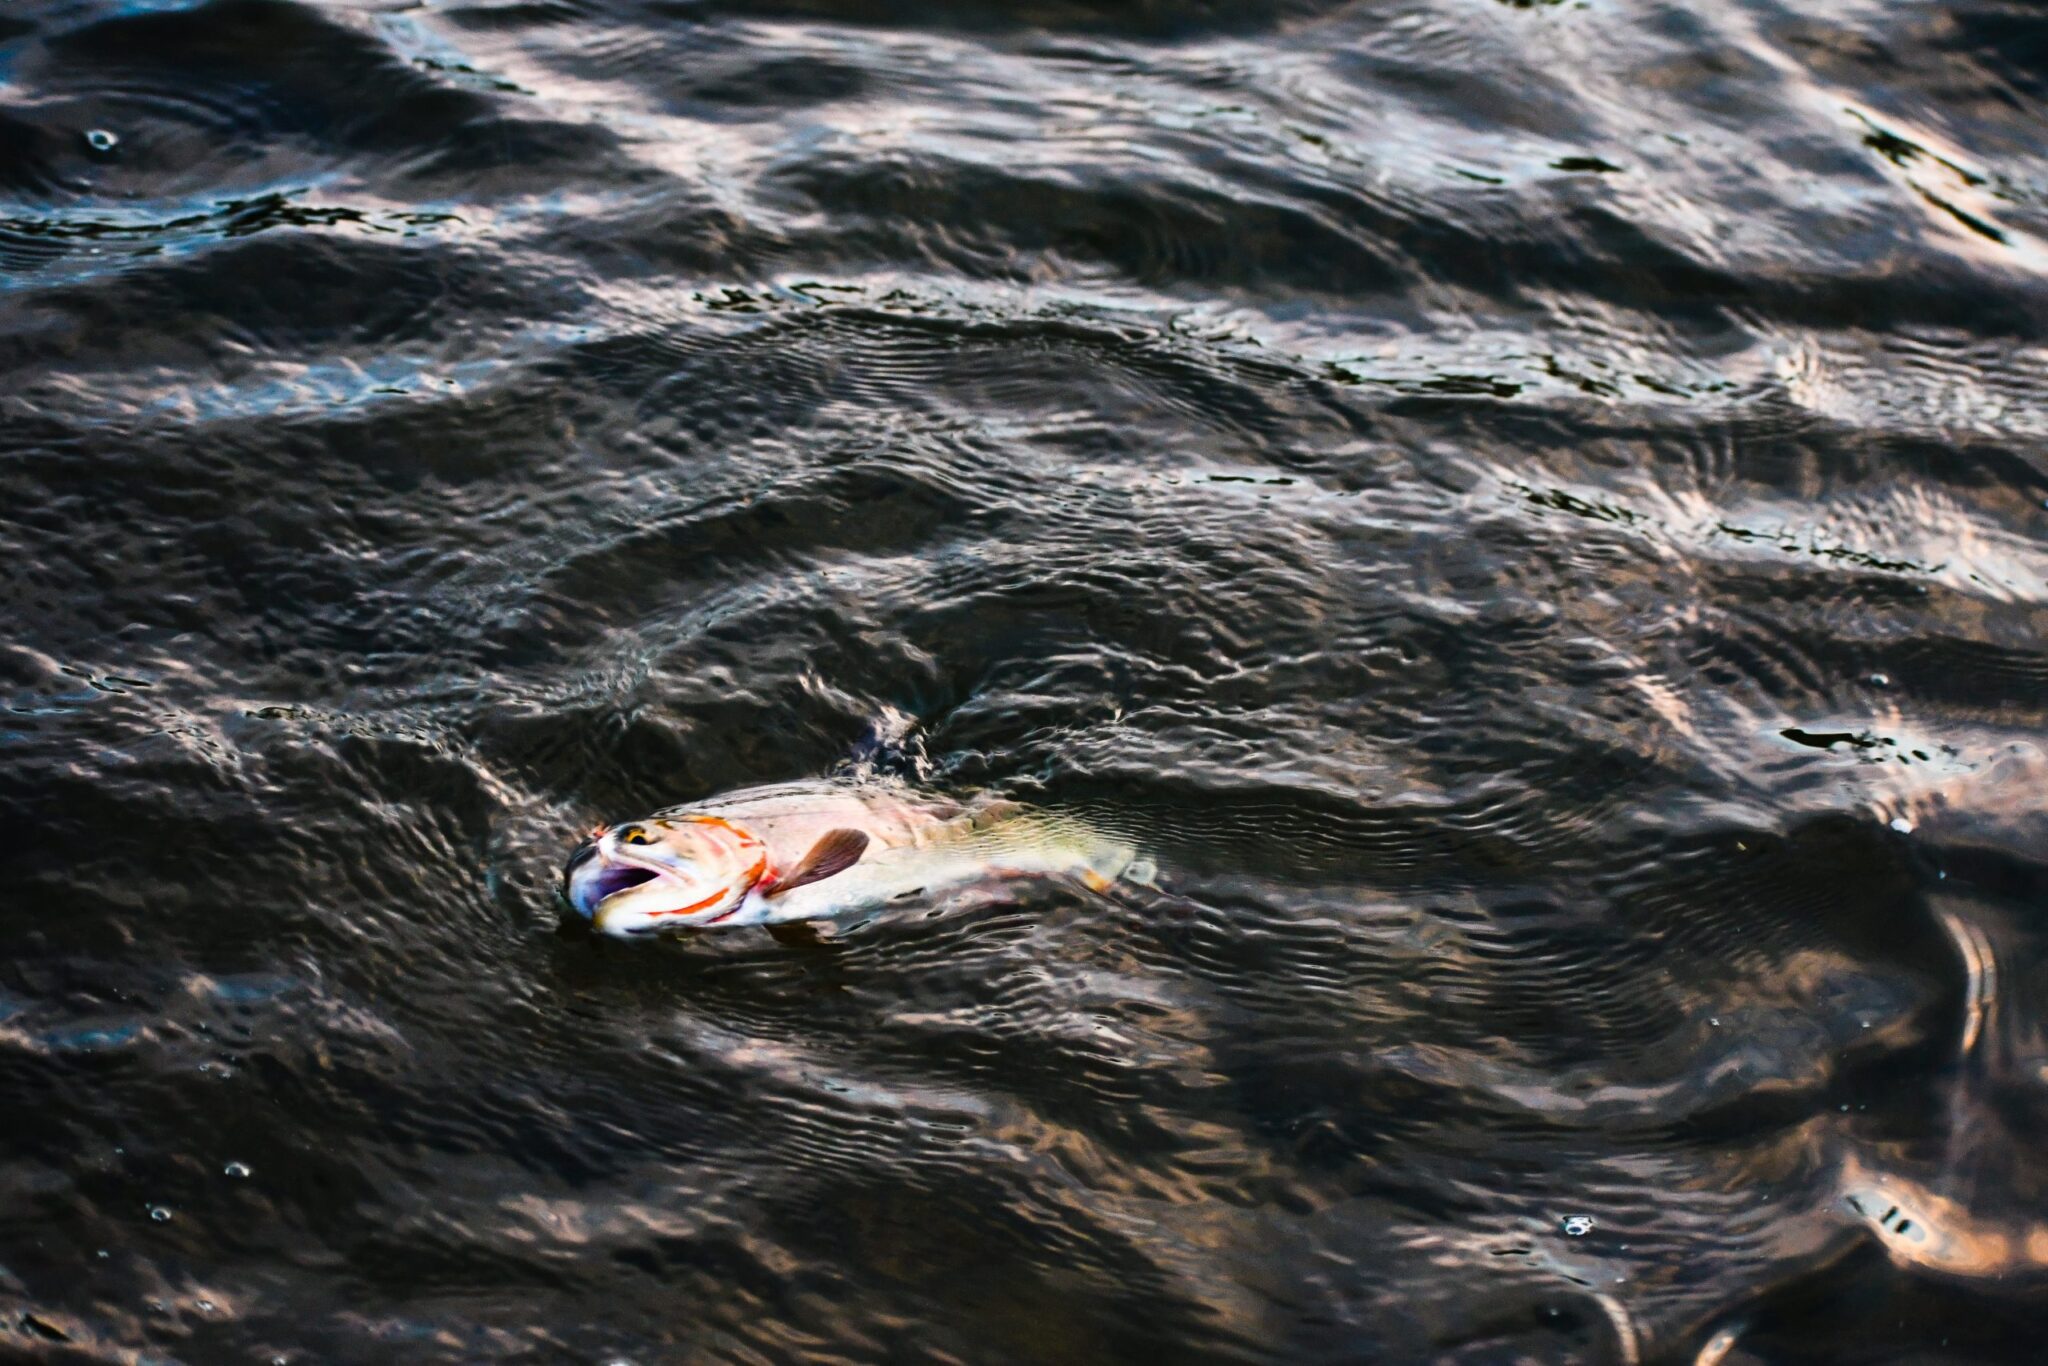 A fish floating on a lake's surface - an example of a fish kill